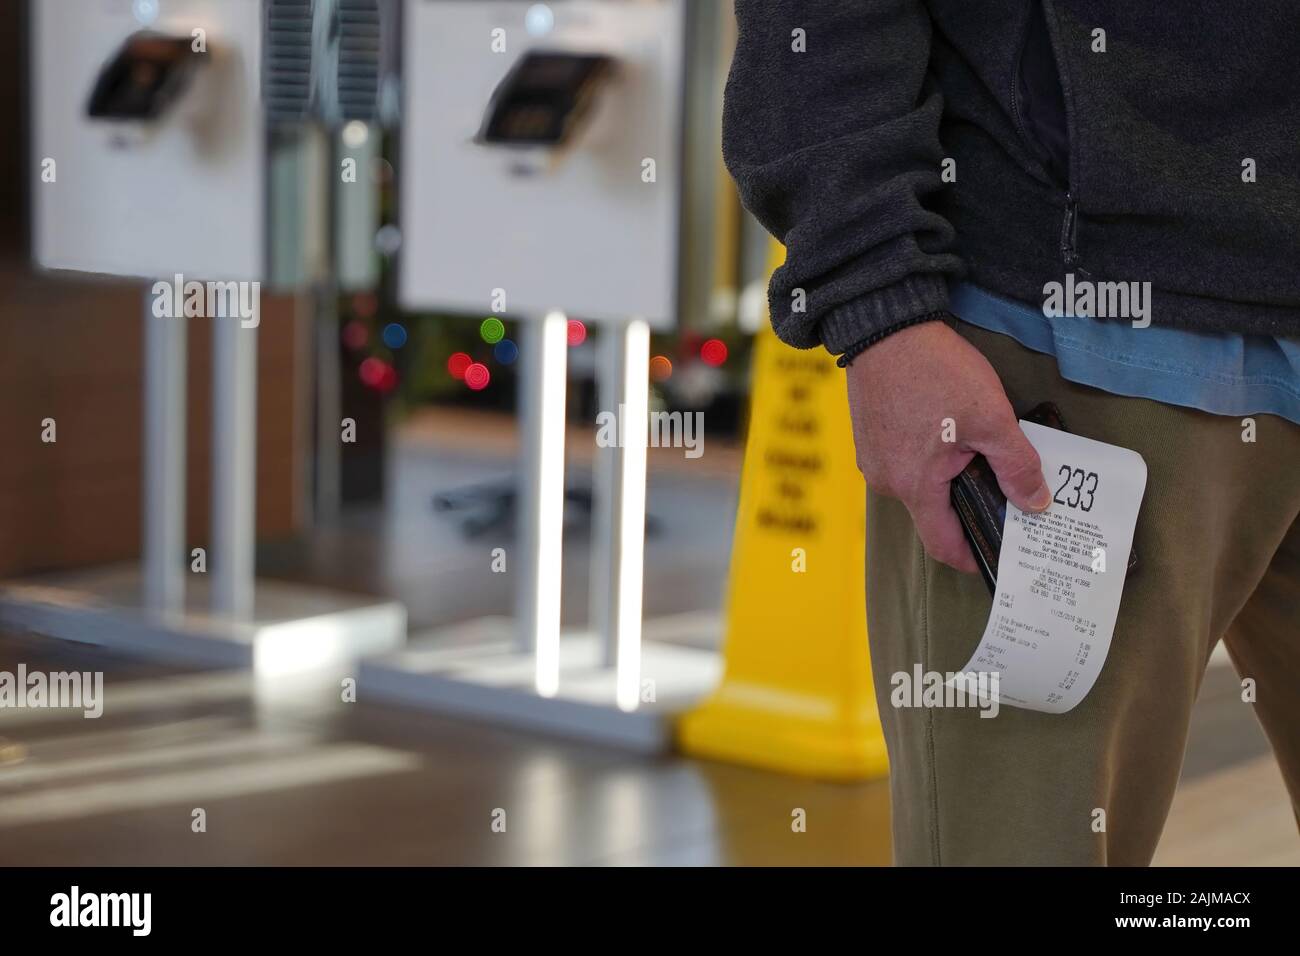 Cromwell, CT / USA - November 25, 2019: Asian man waiting in line holding his receipt with his order number Stock Photo